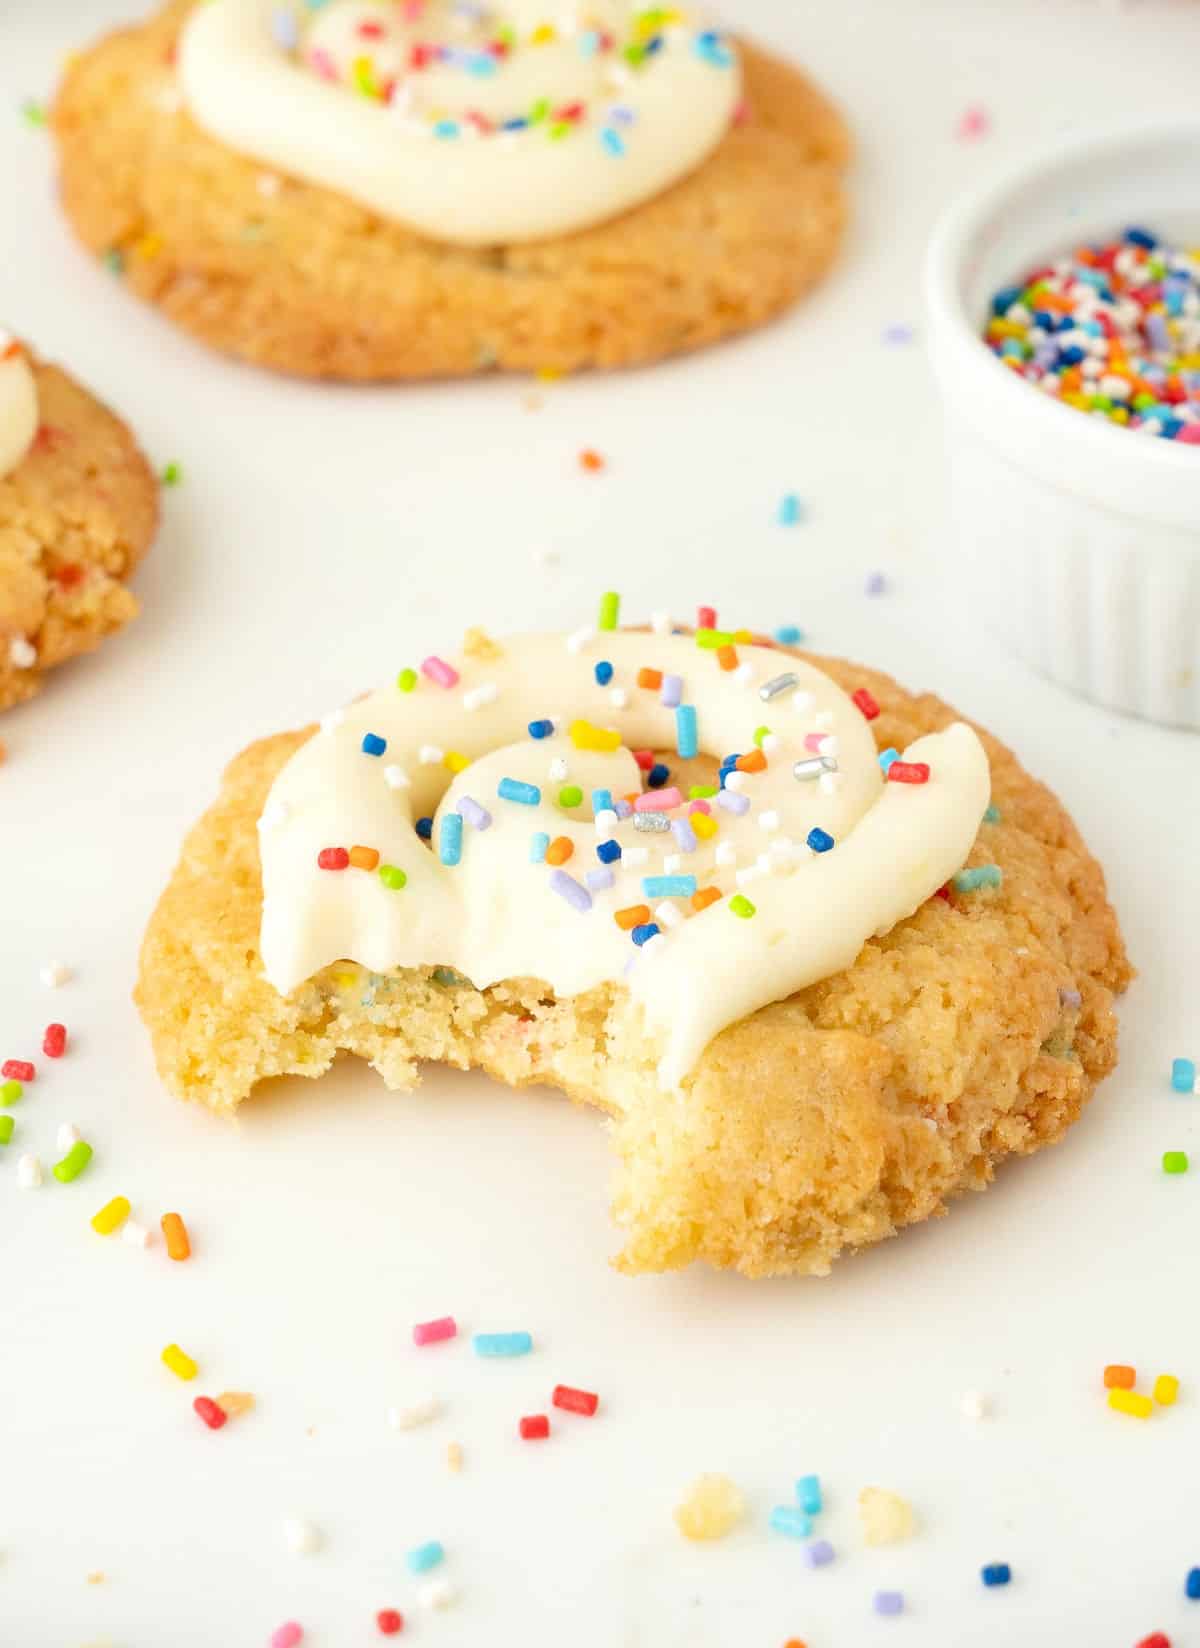 Bitten frosted funfetti cookie on a white surface with sprinkles. Whole cookie in the background.